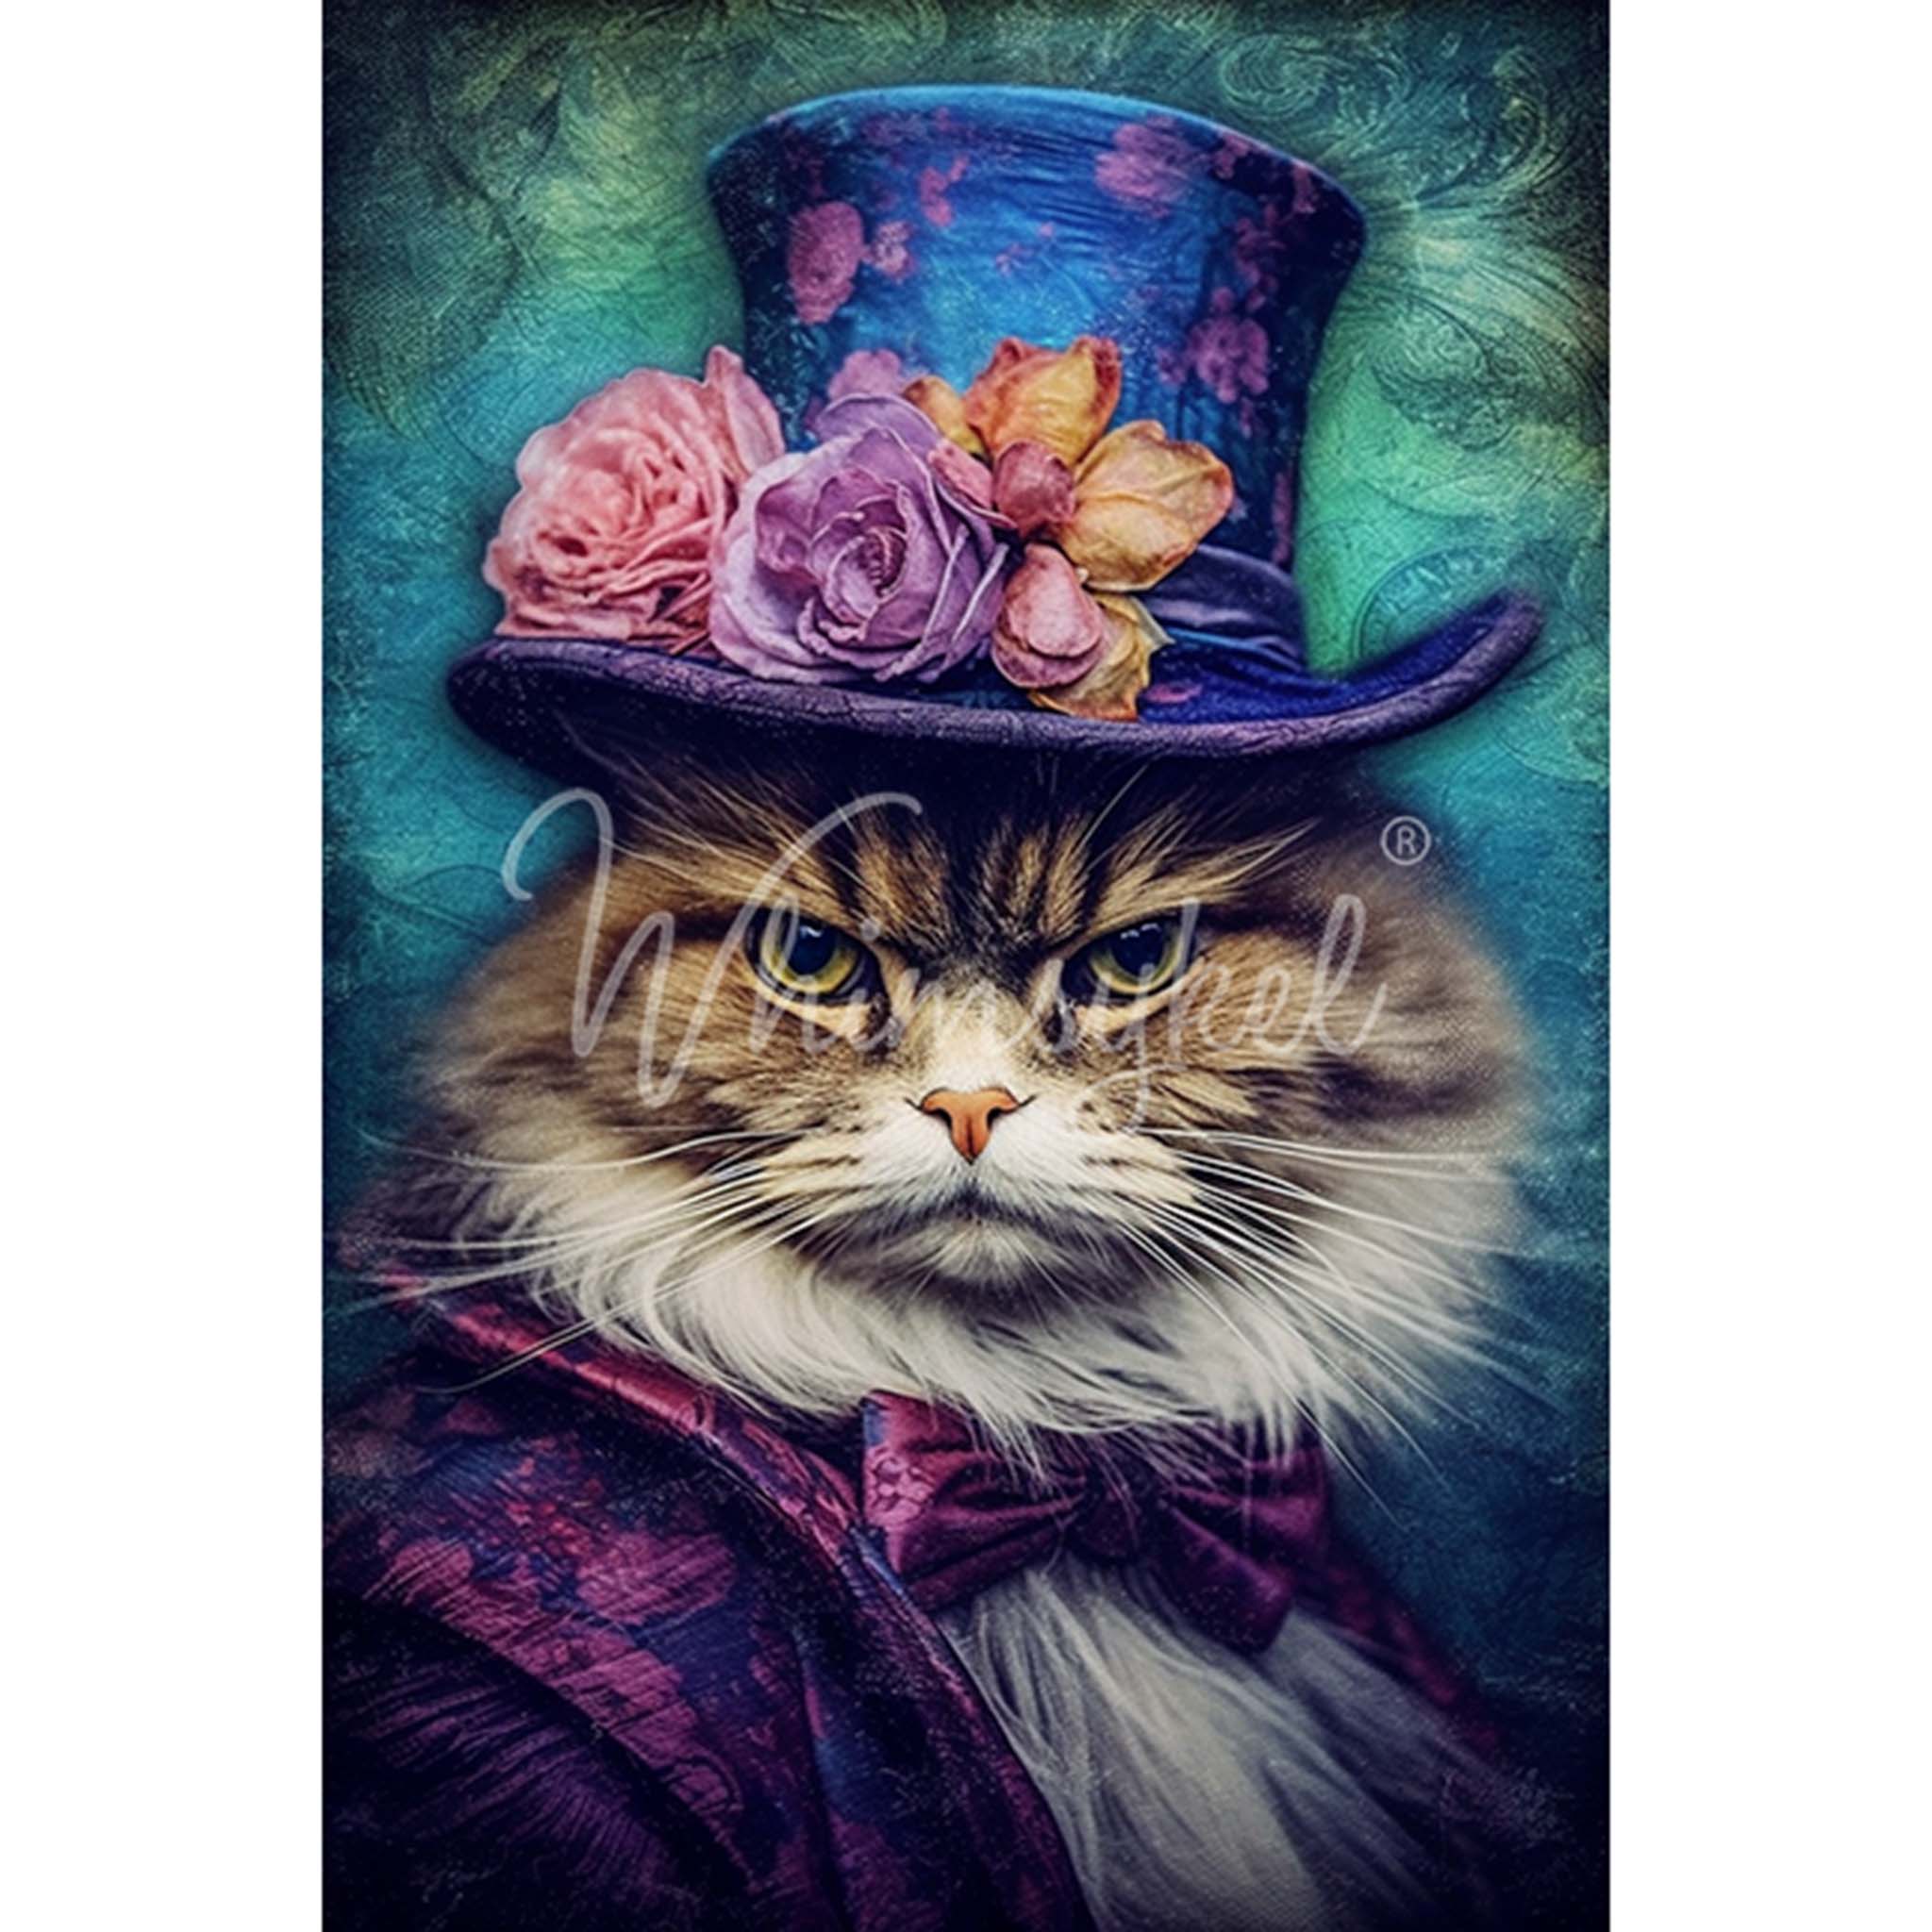 Tissue paper design that features enchanting artwork that perfectly captures the essence of a grumpy yet dapper cat in a jacket with a bowtie and is wearing a top hat with purple and pink roses. White borders are on the sides.